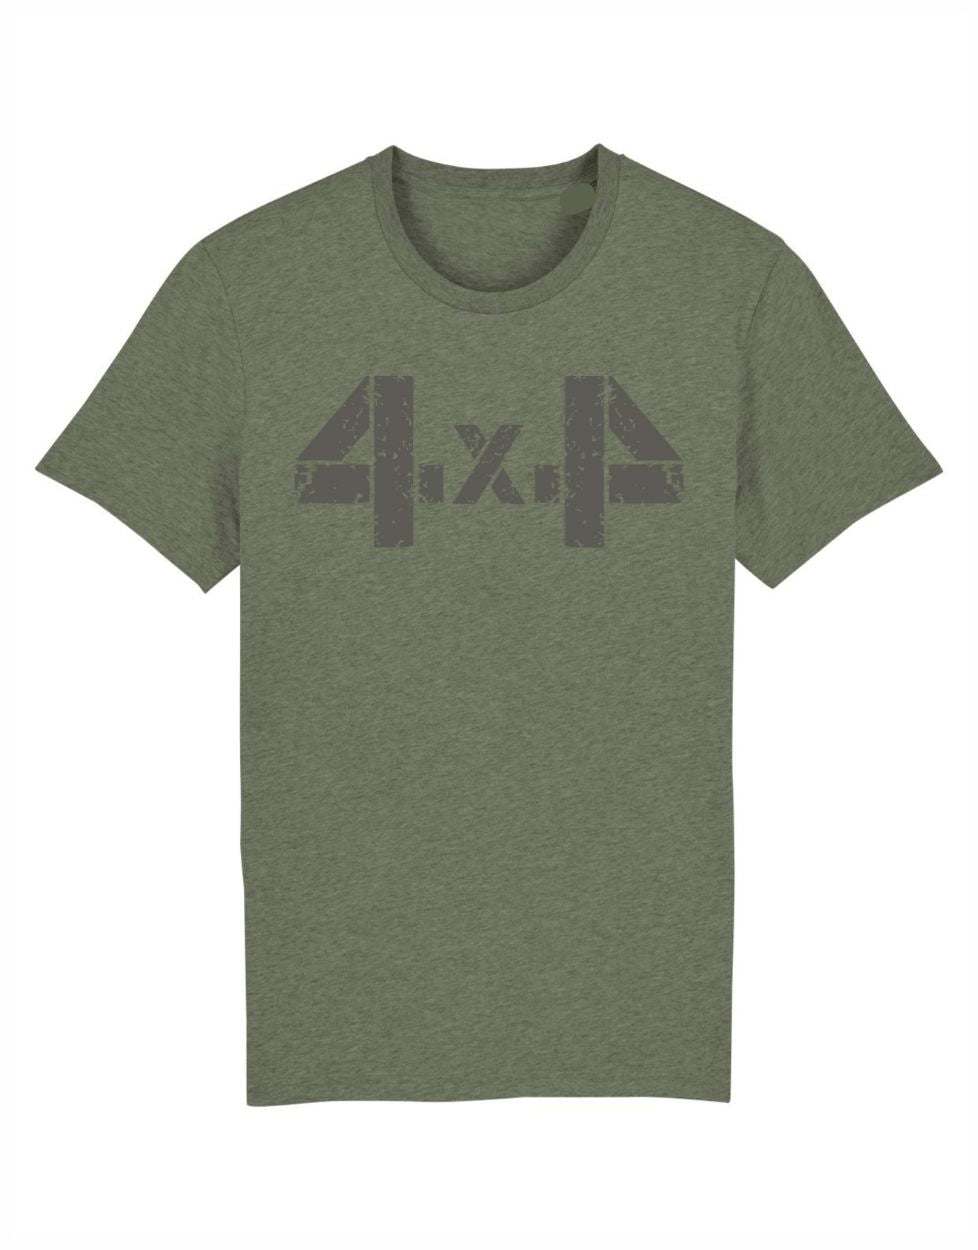 4x4 Offroad Definition T-Shirt